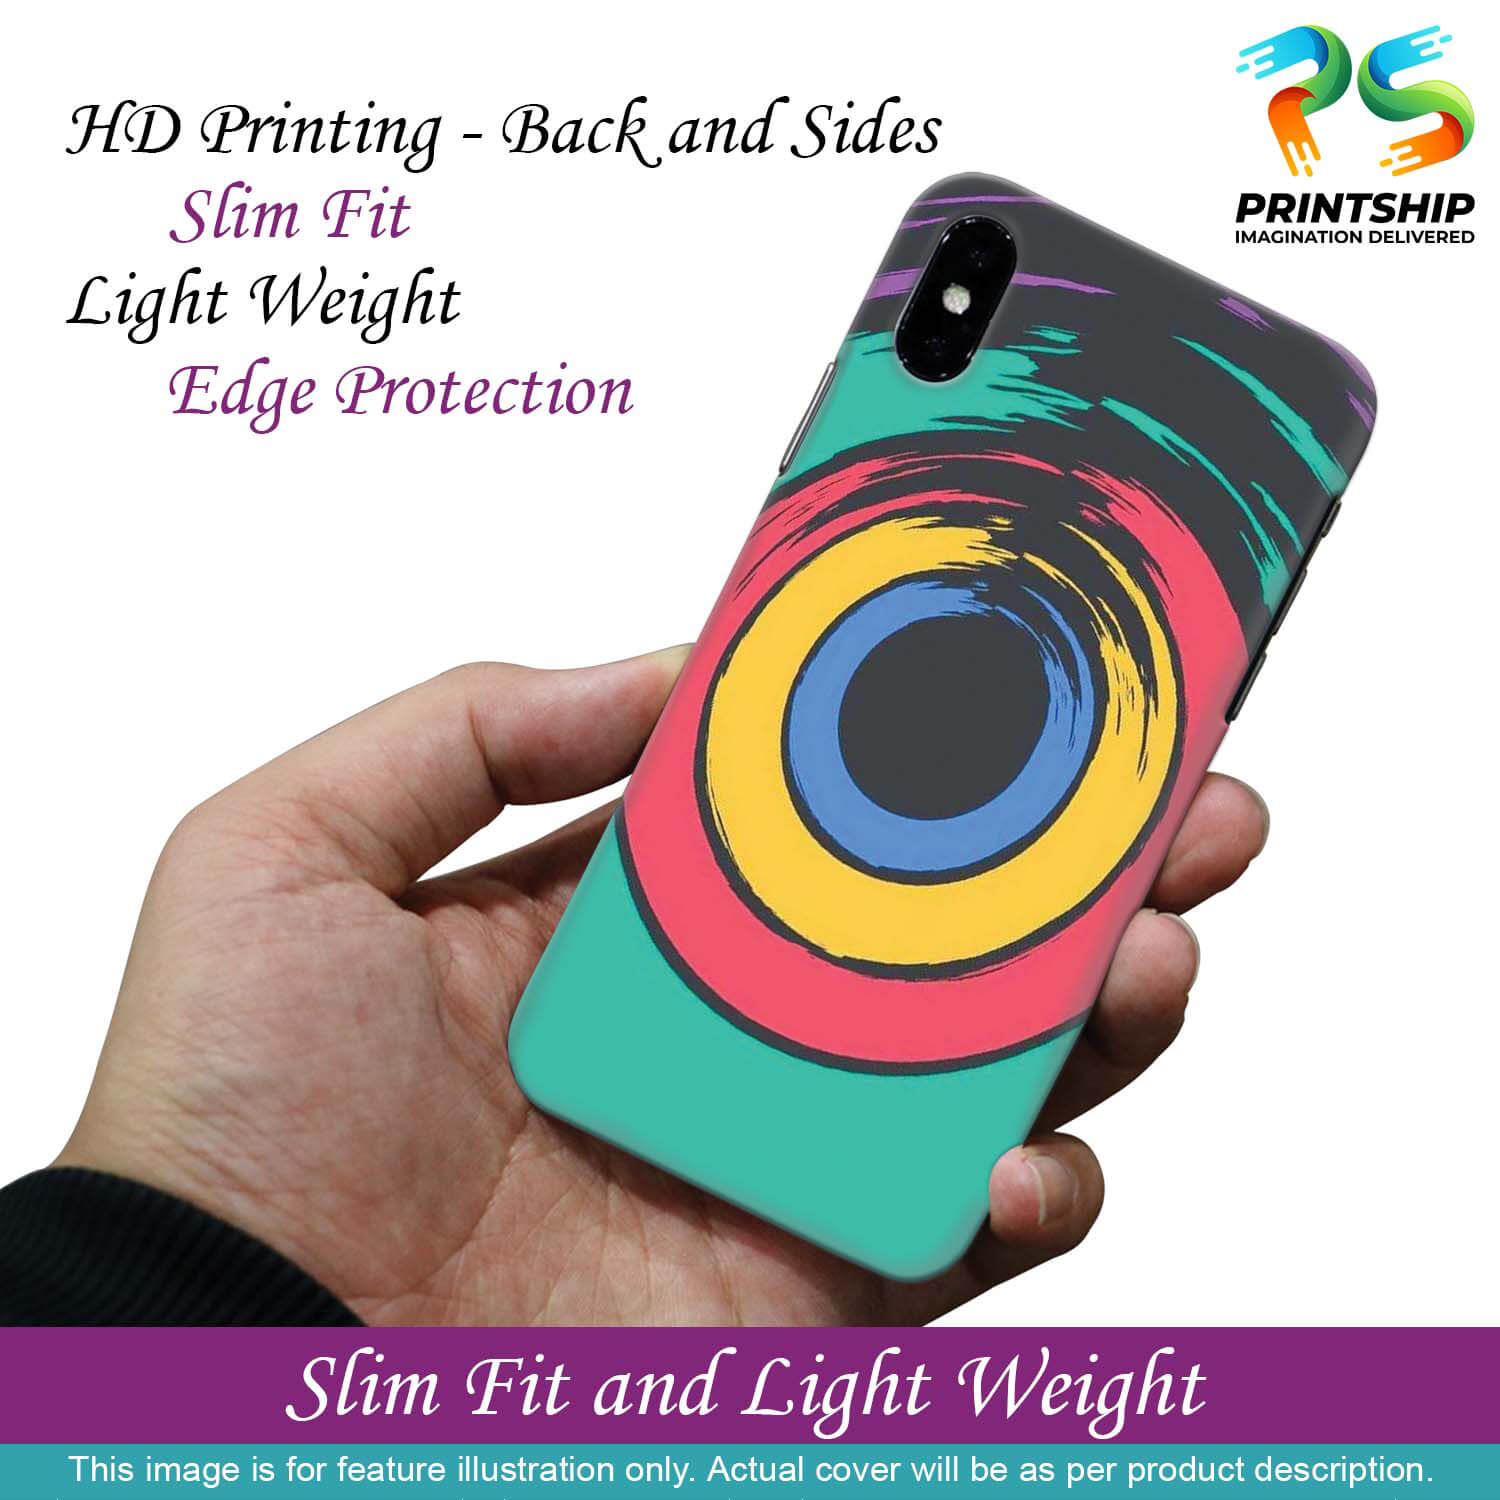 PS1305-Insomniac Eye Back Cover for Realme Narzo 30 Pro